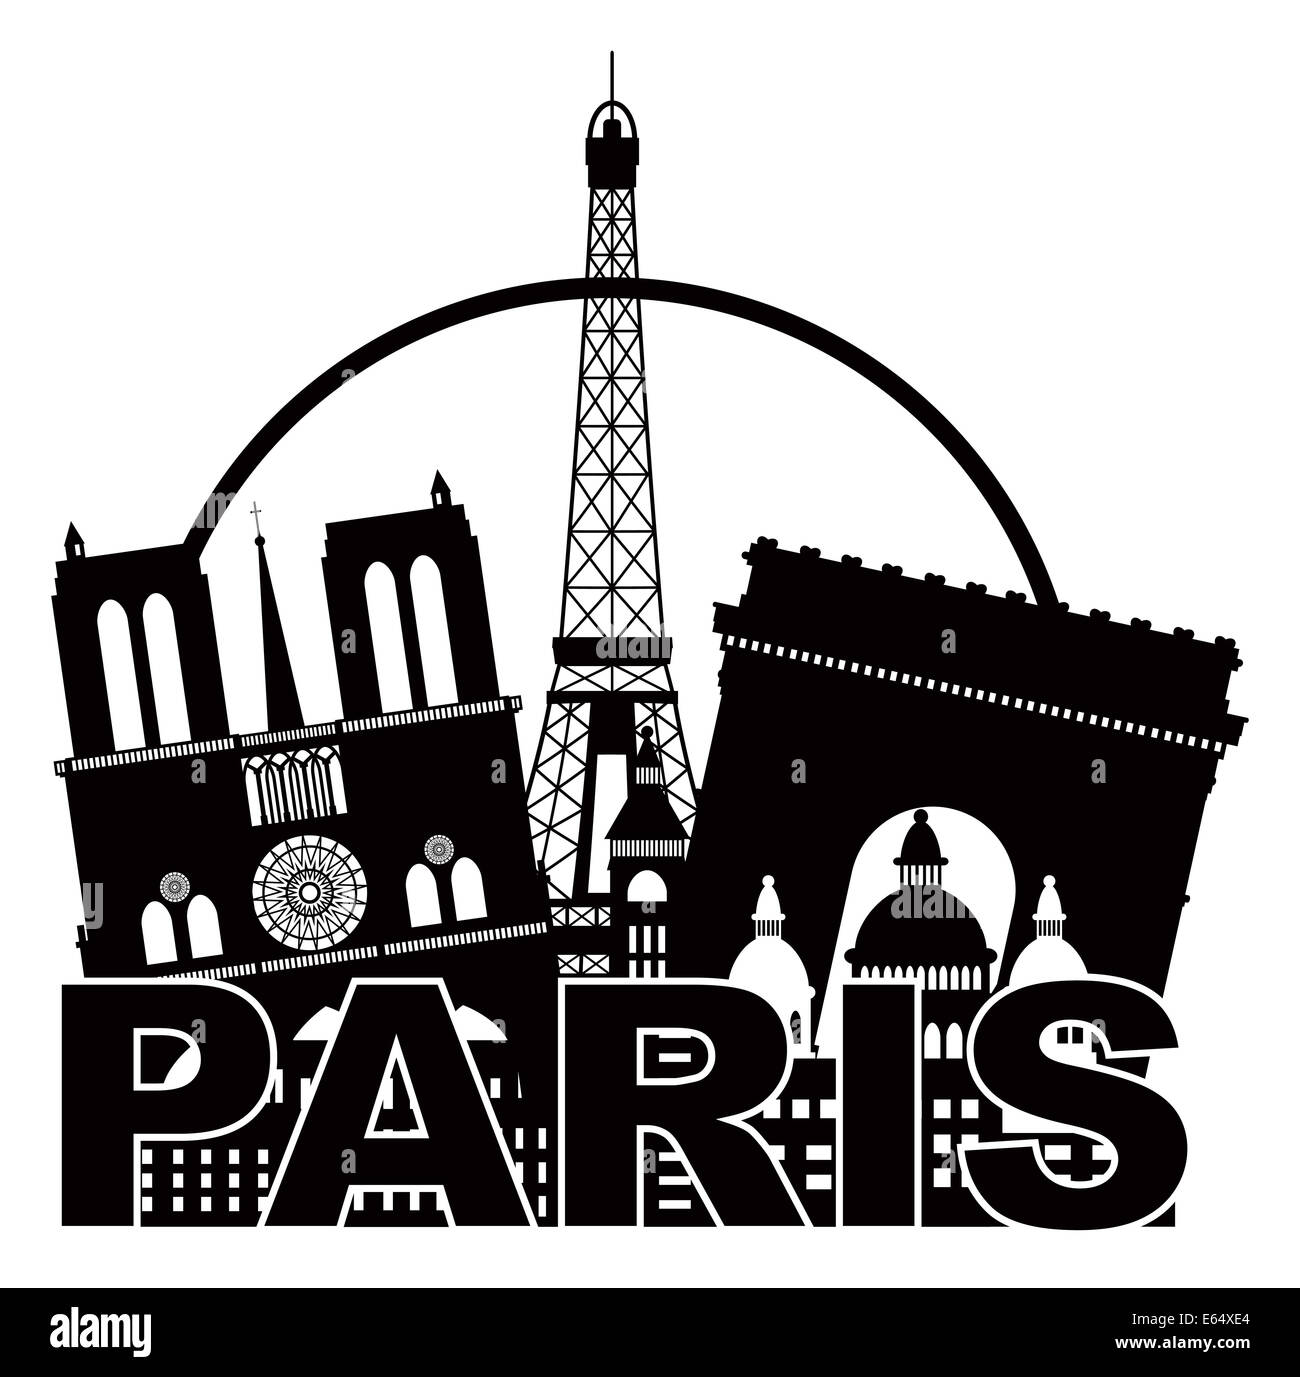 Paris France City Skyline Outline Silhouette Black in Circle Isolated on White Background Panorama Illustration Stock Photo